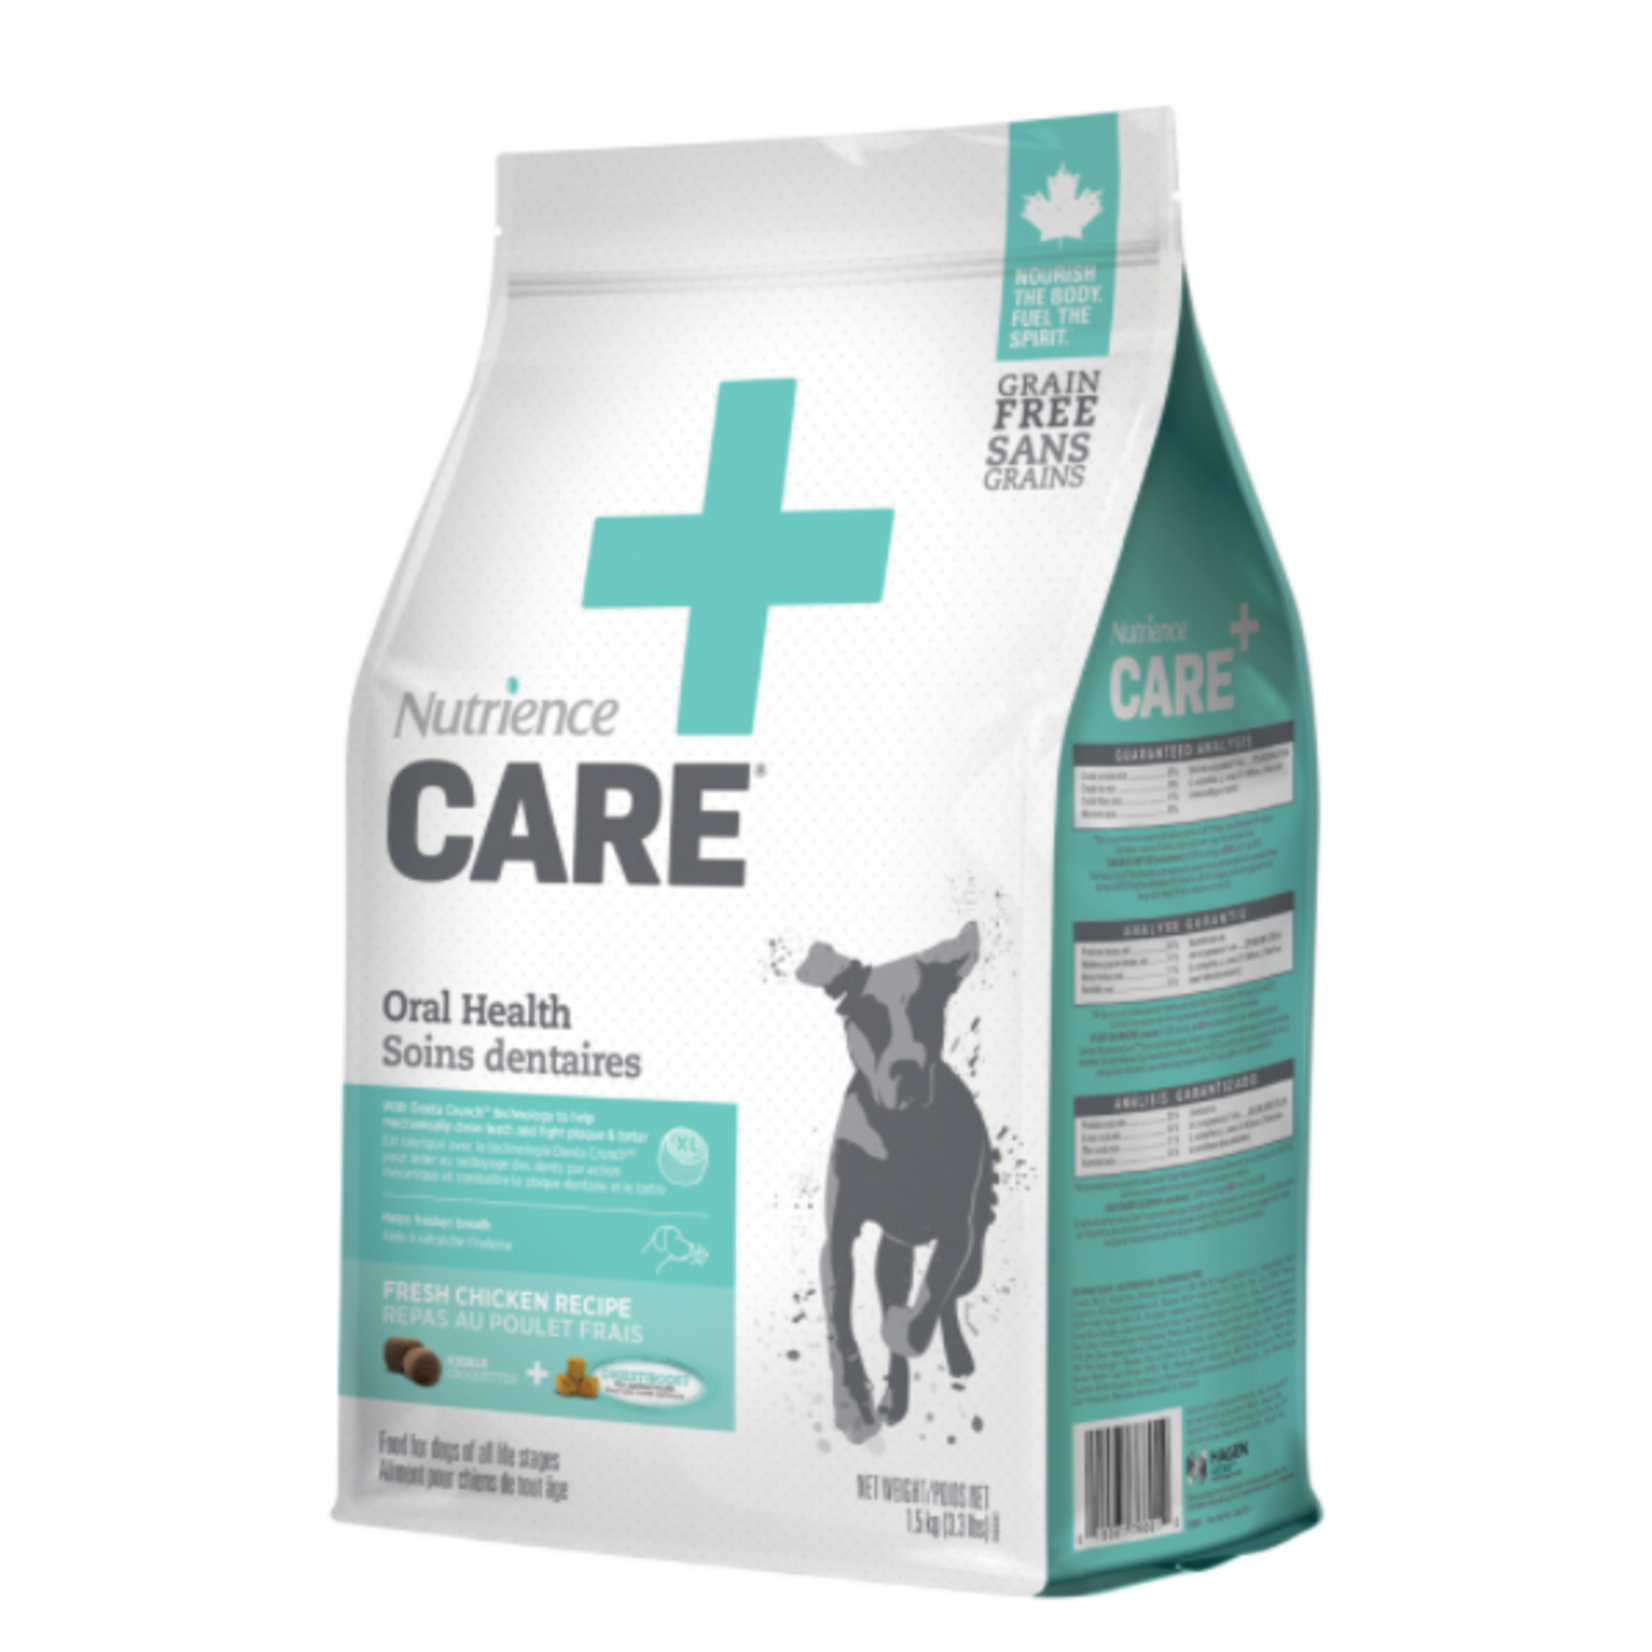 Nutrience Care Oral Health for Dogs - 3.3 lbs